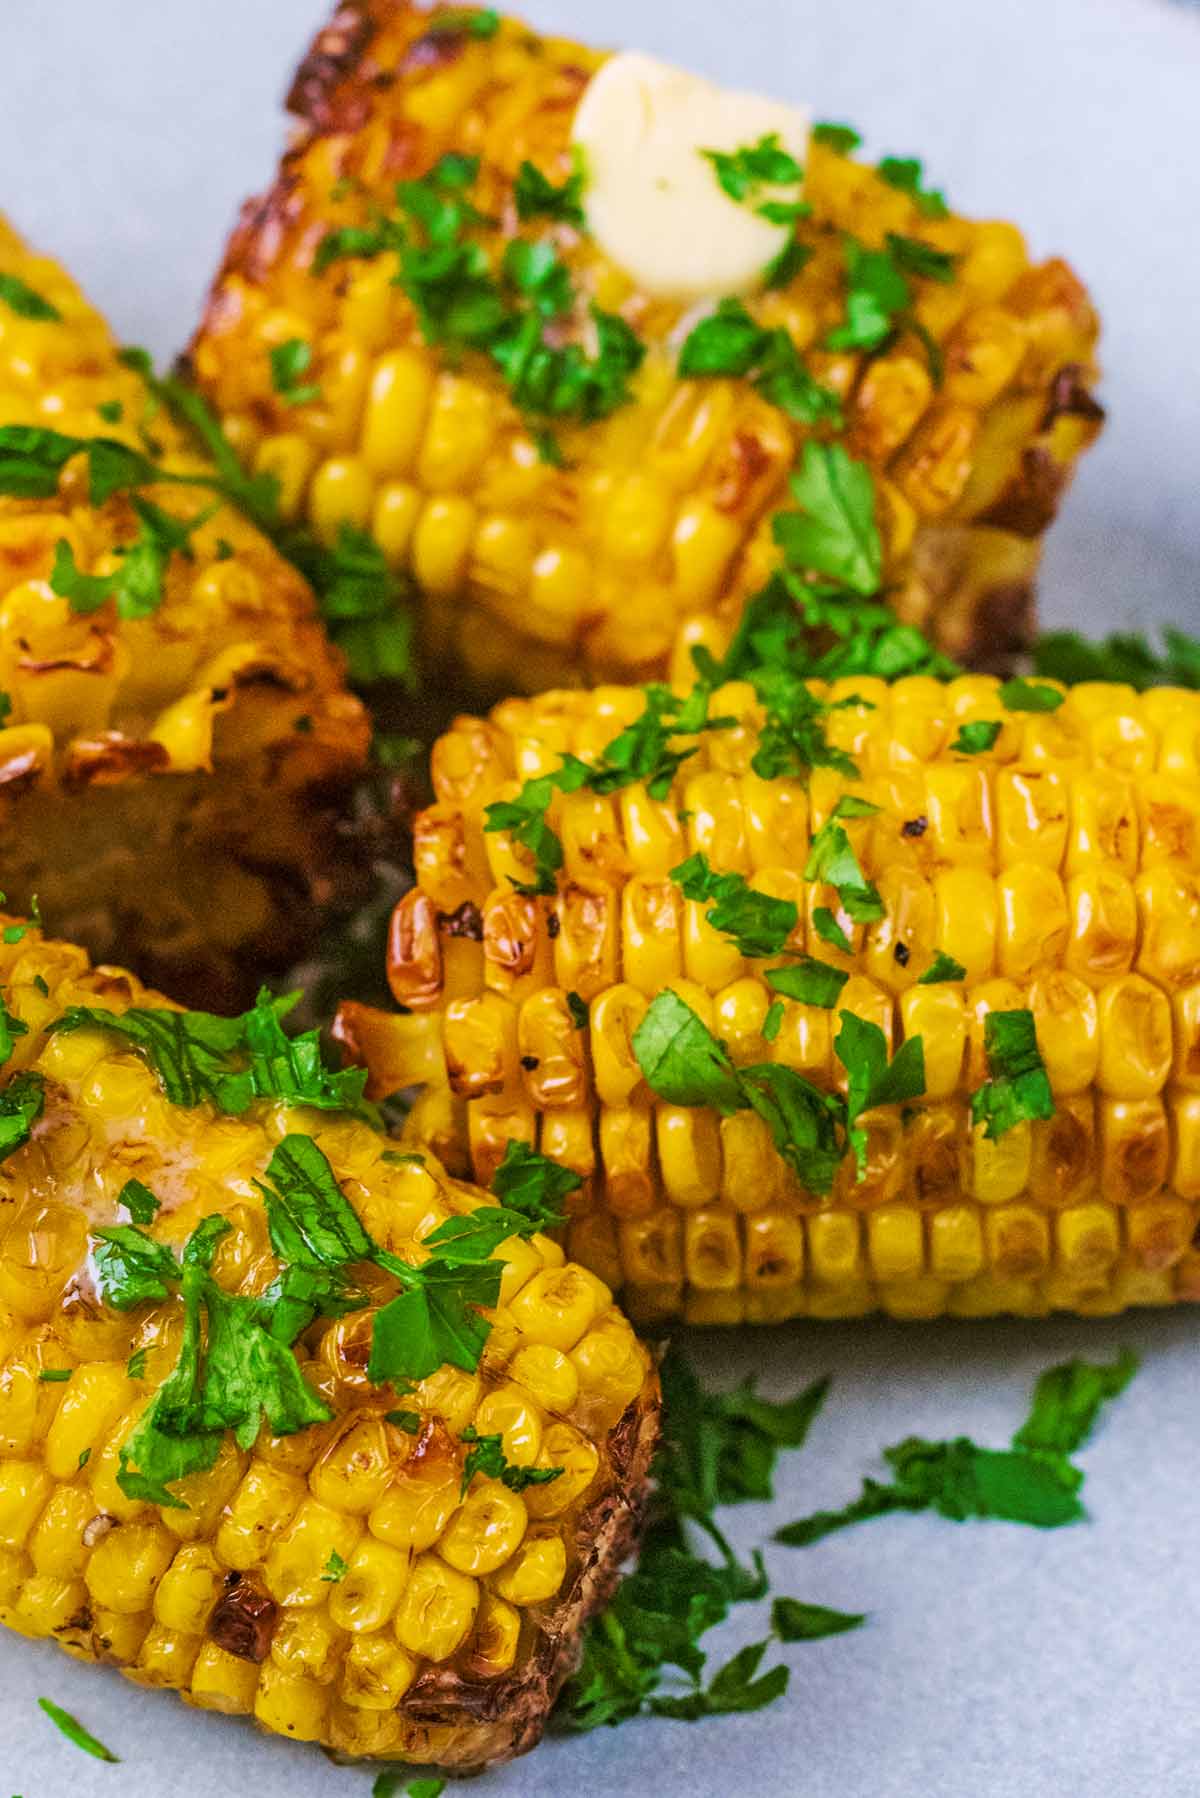 Four cooked corn cobs topped with butter and chopped herbs.